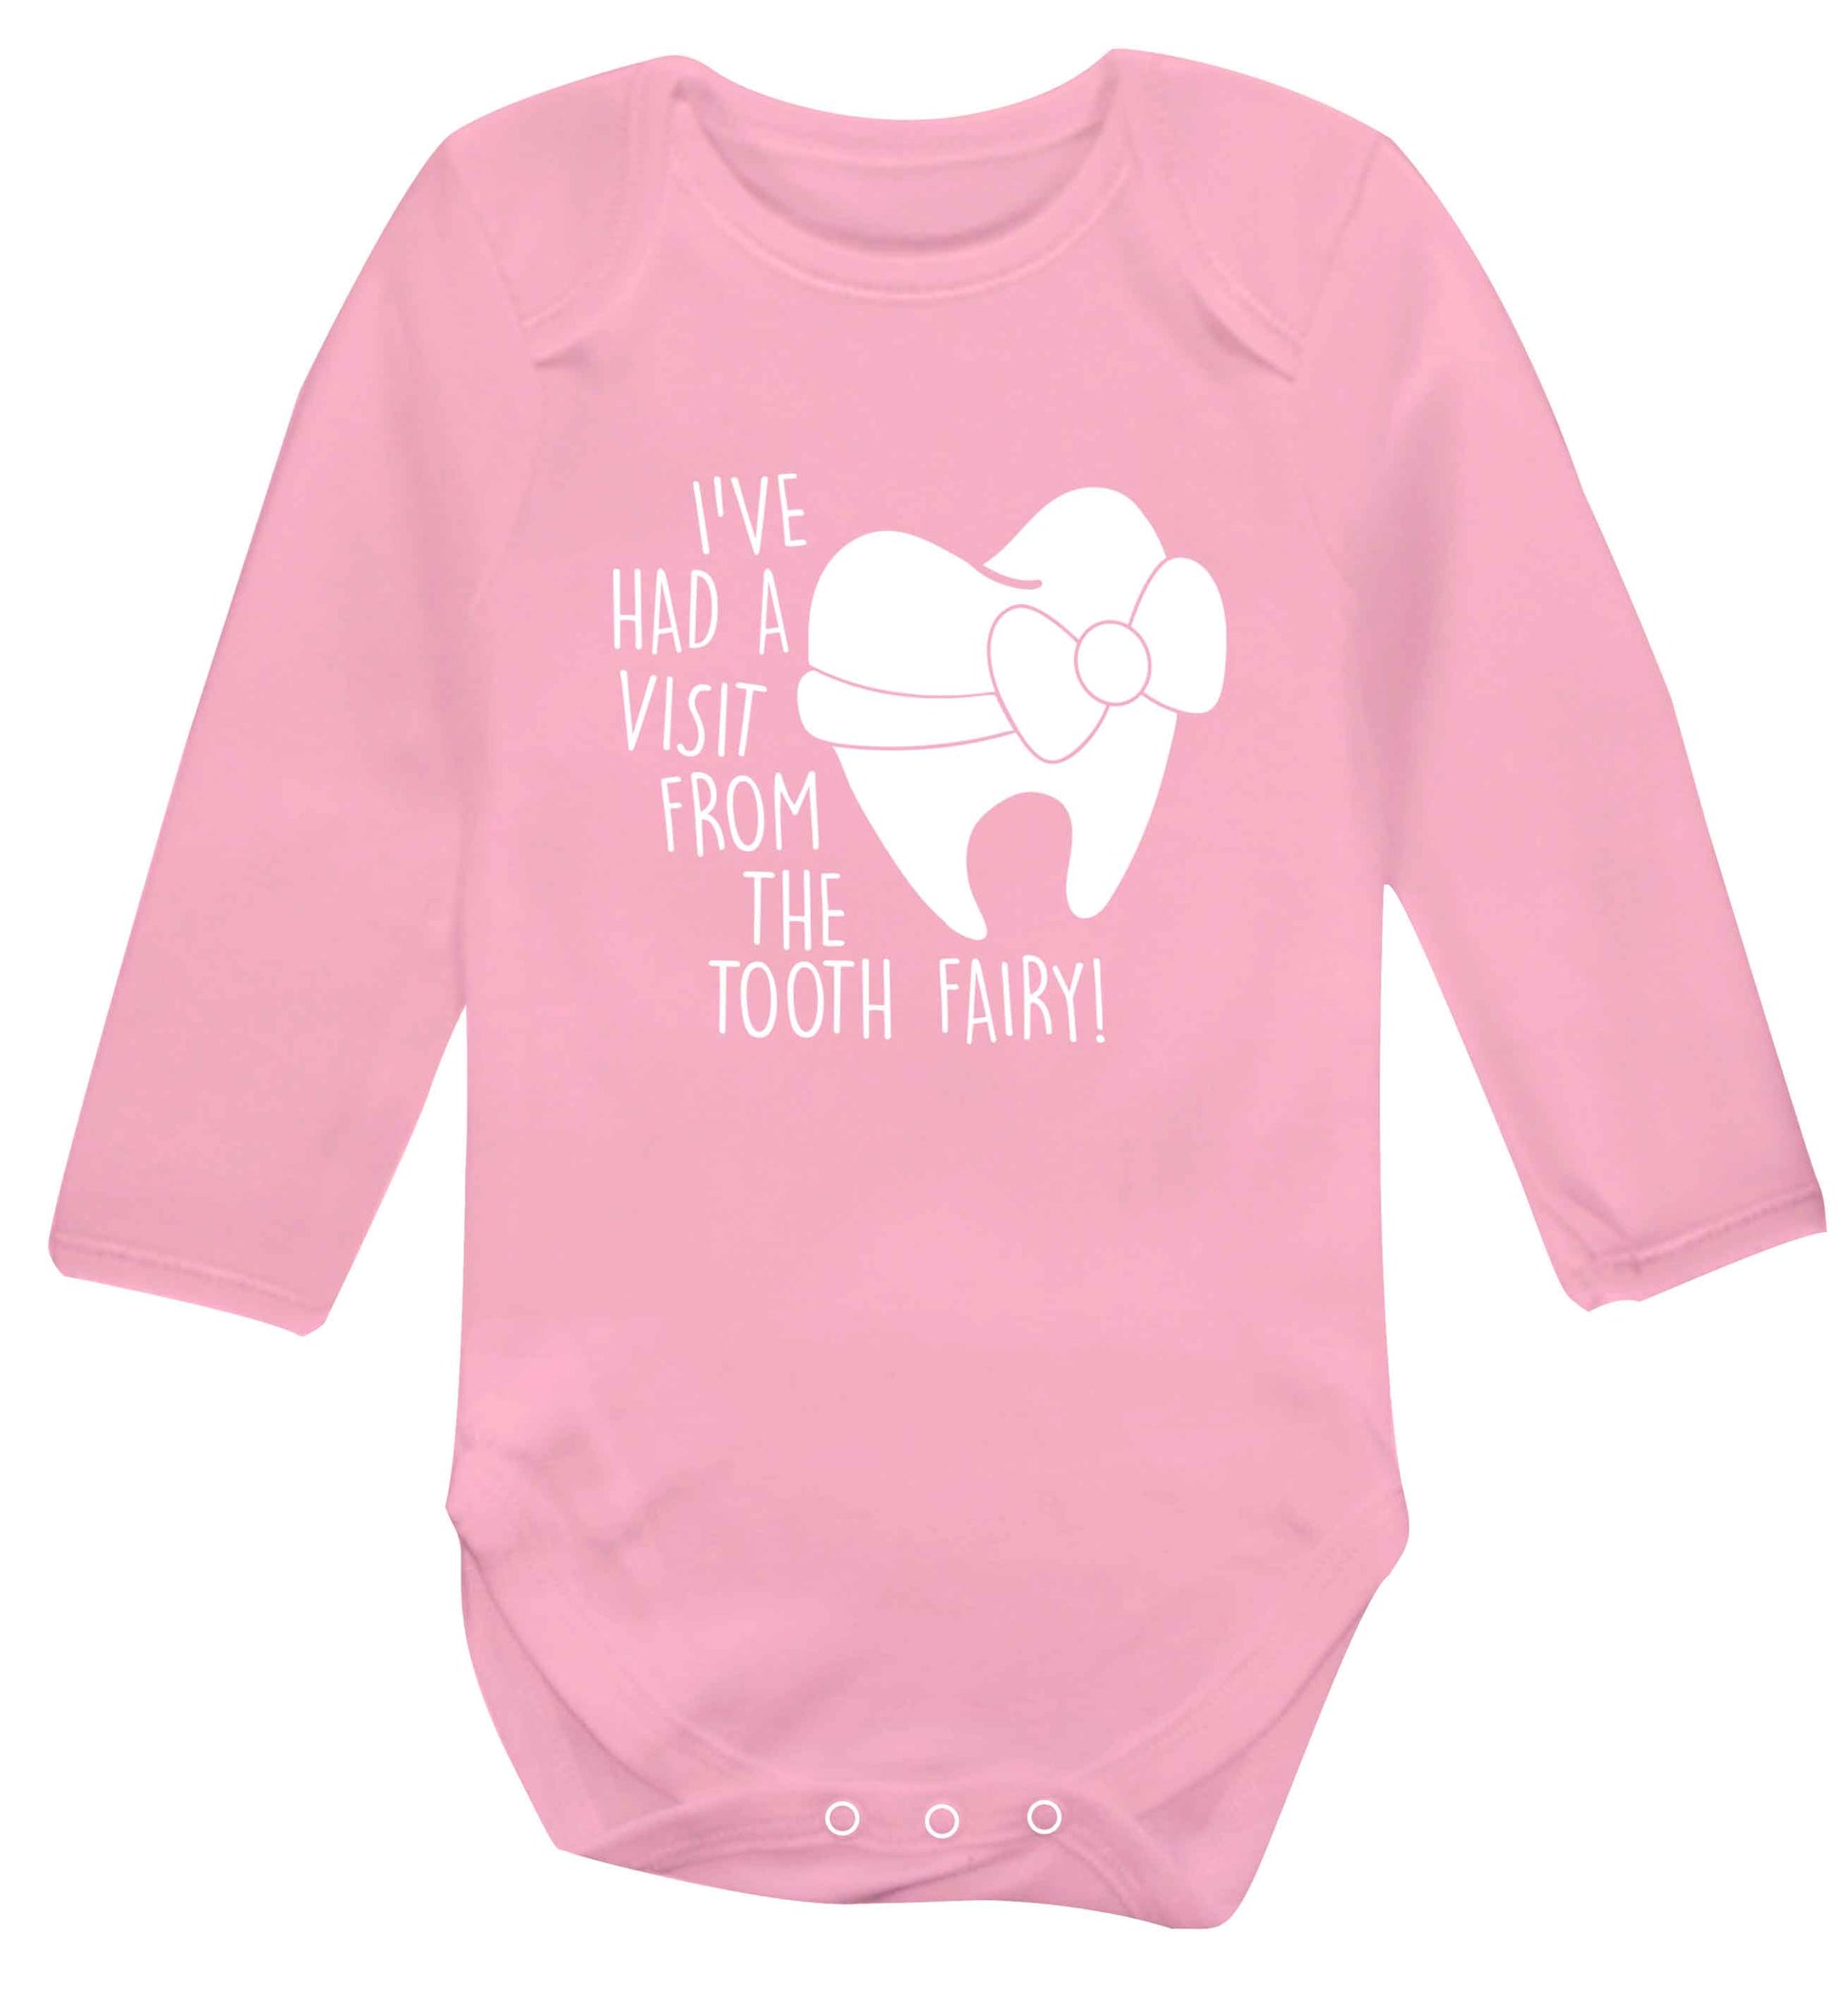 Visit From Tooth Fairy baby vest long sleeved pale pink 6-12 months